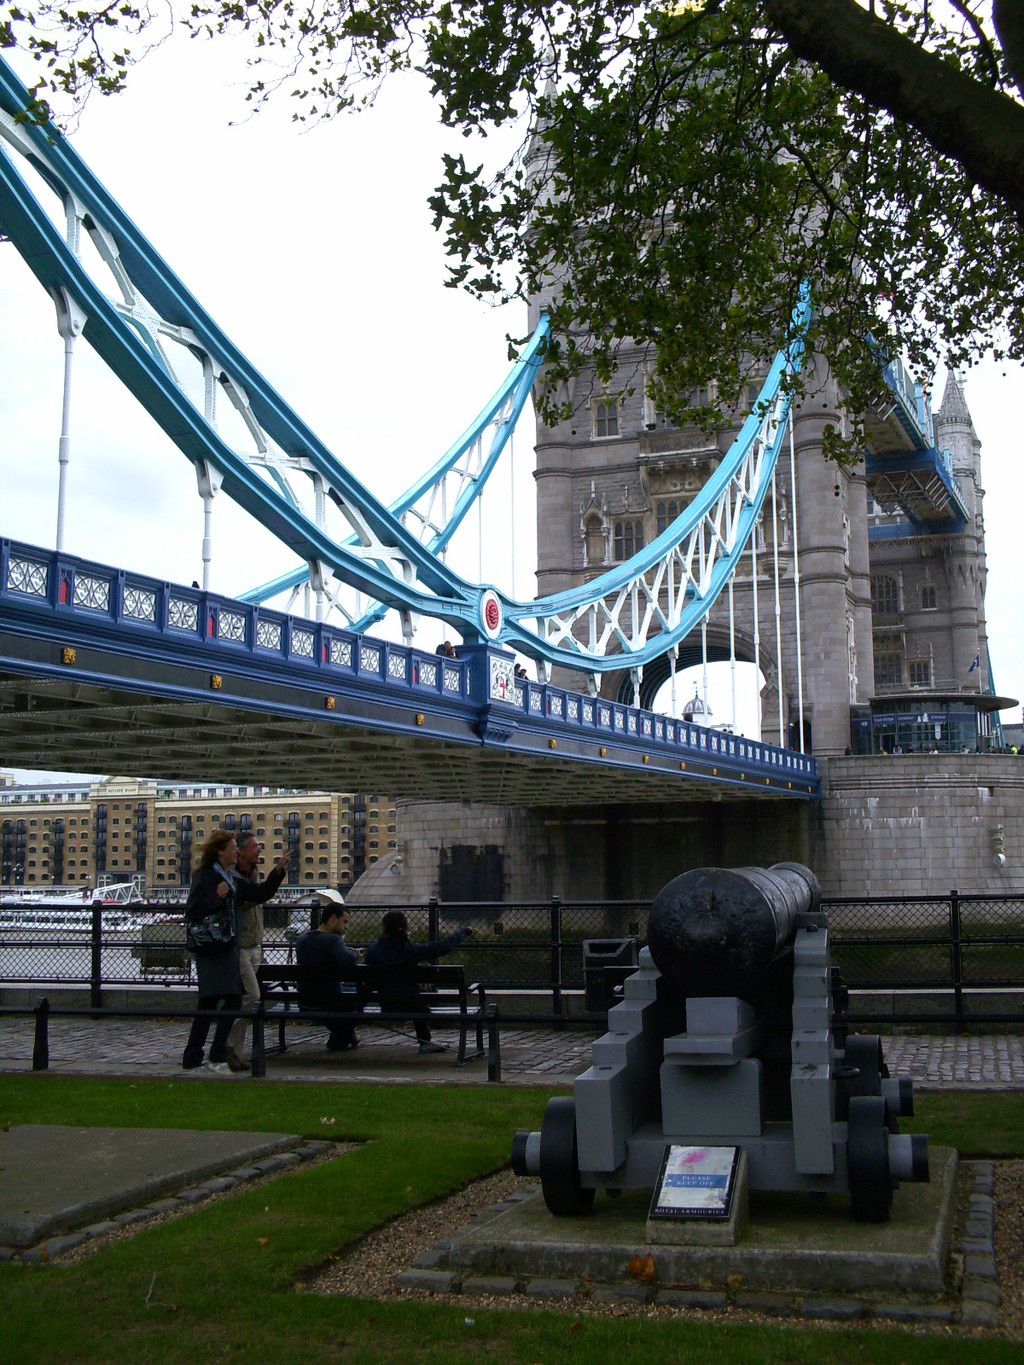 the-famous-tower-bridge-ccee9e6bf8106f88